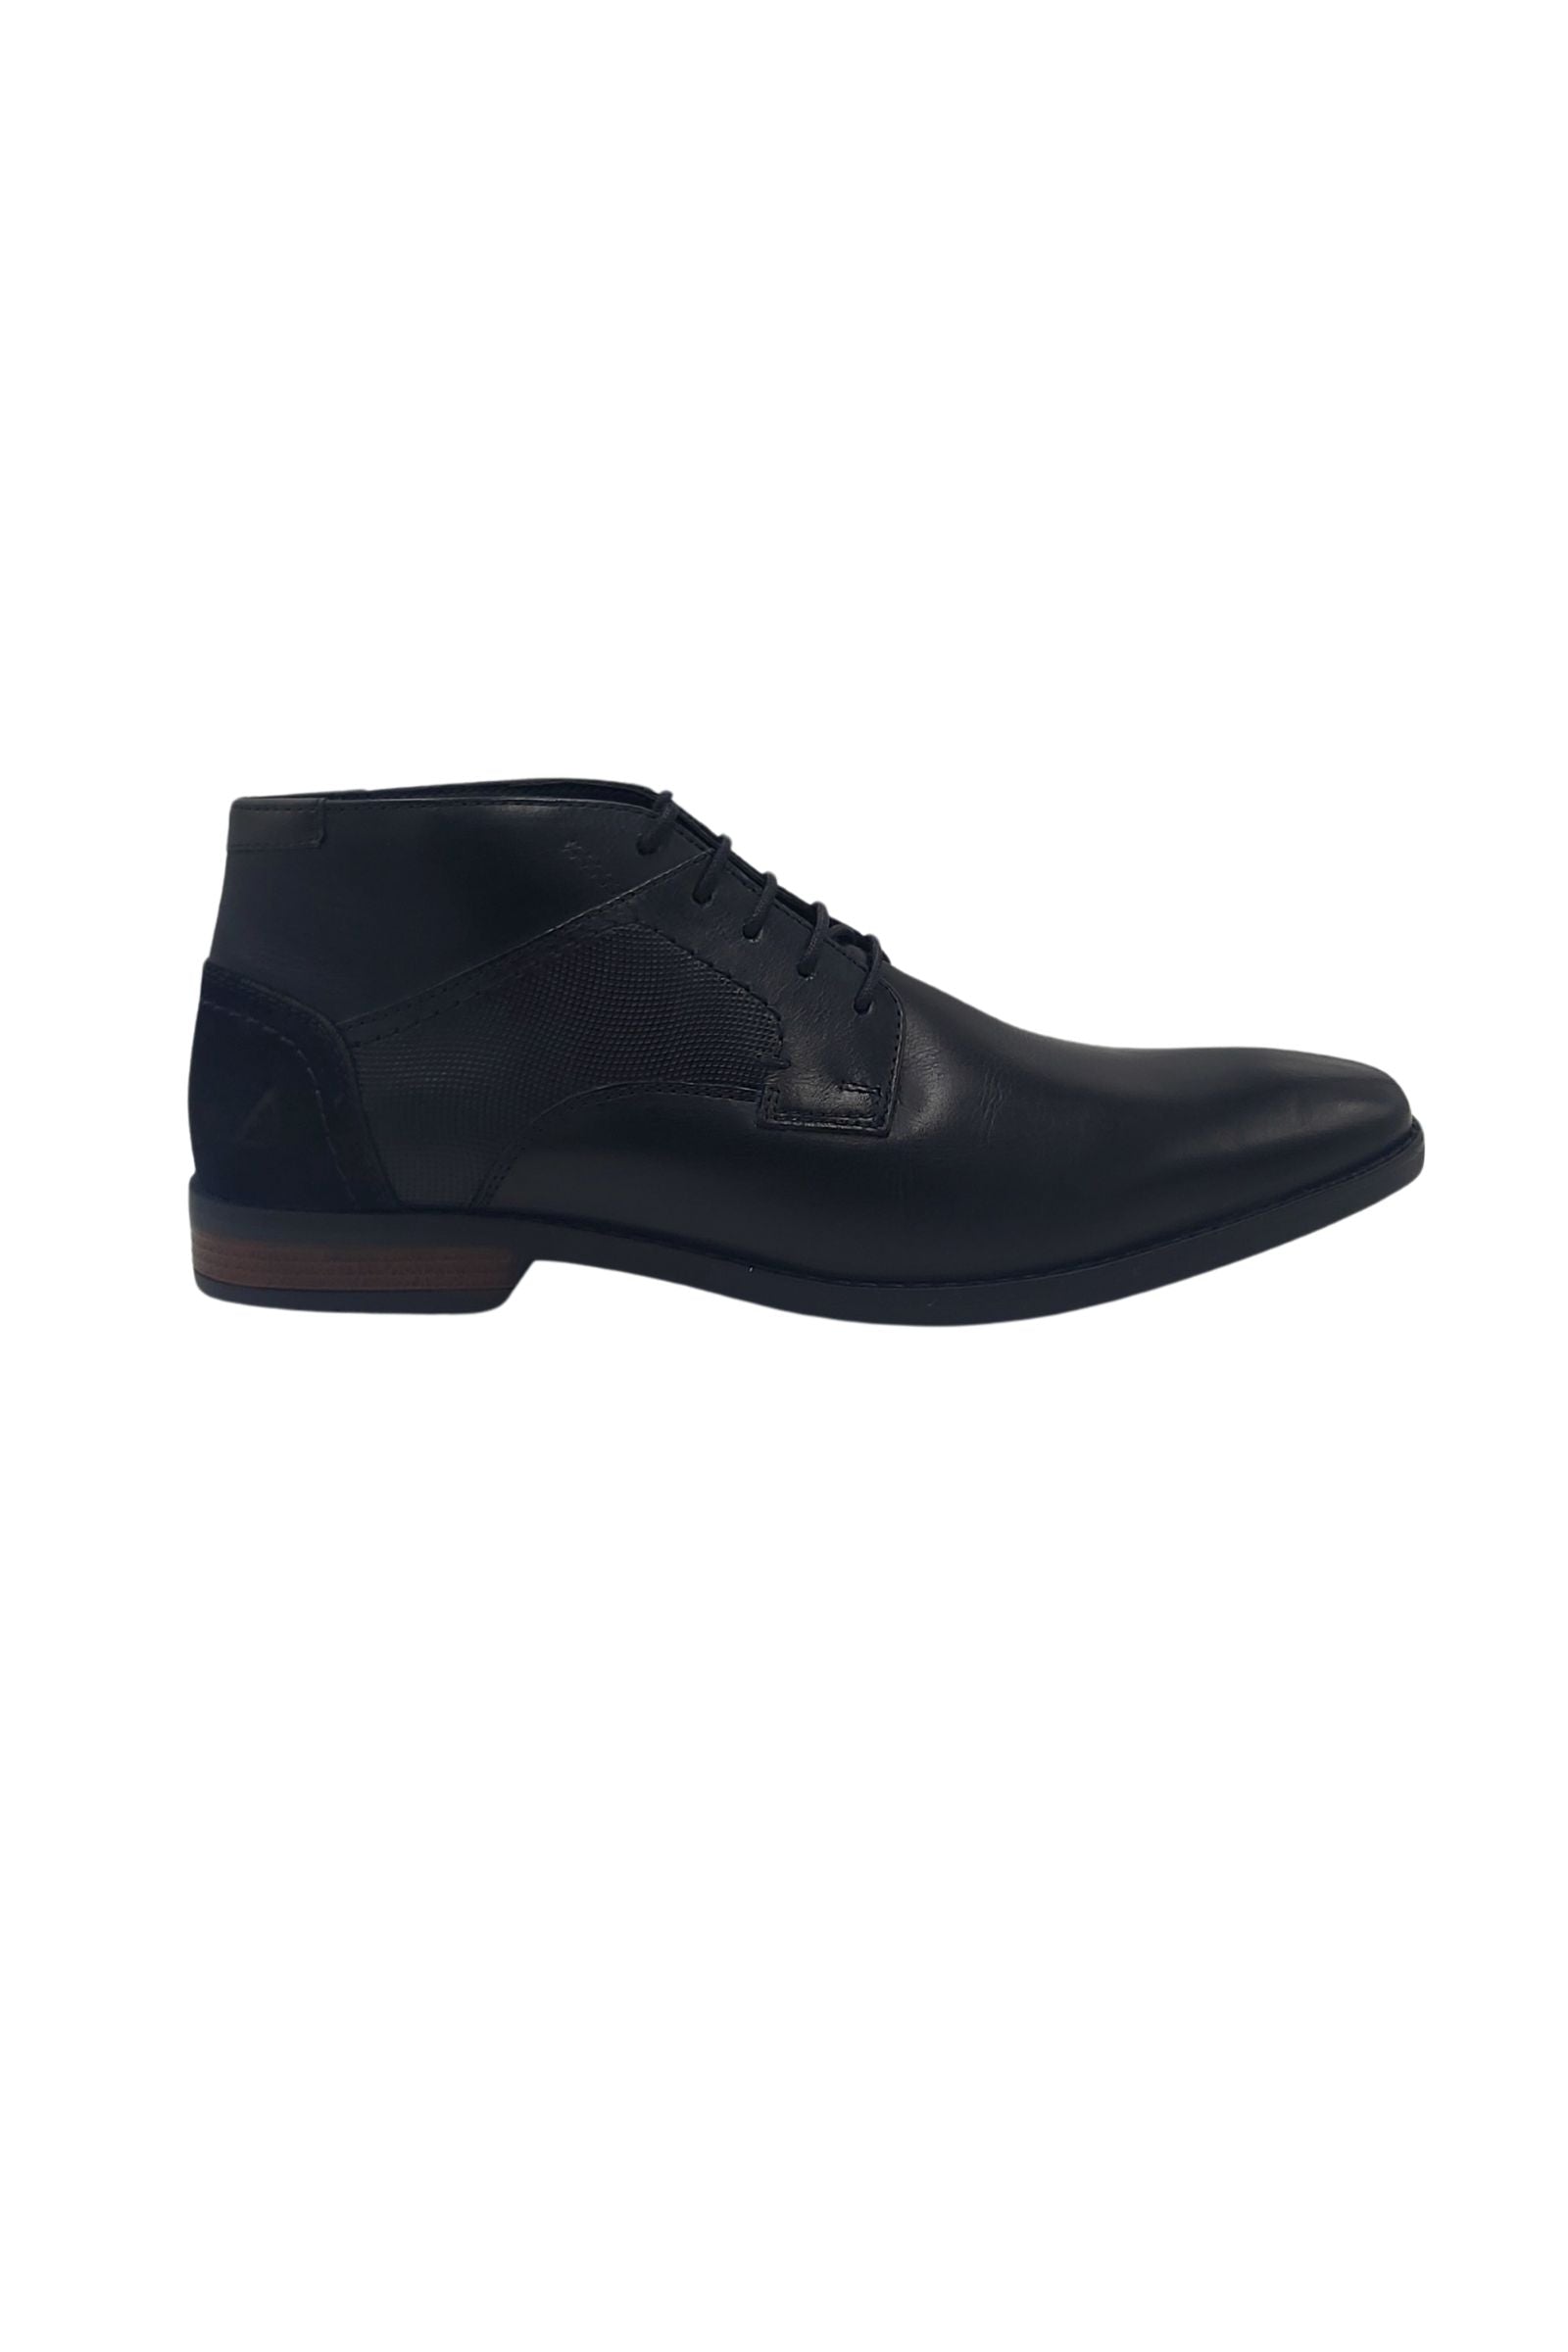 Men's Woodhaven Navy Ankle Boot-Side View